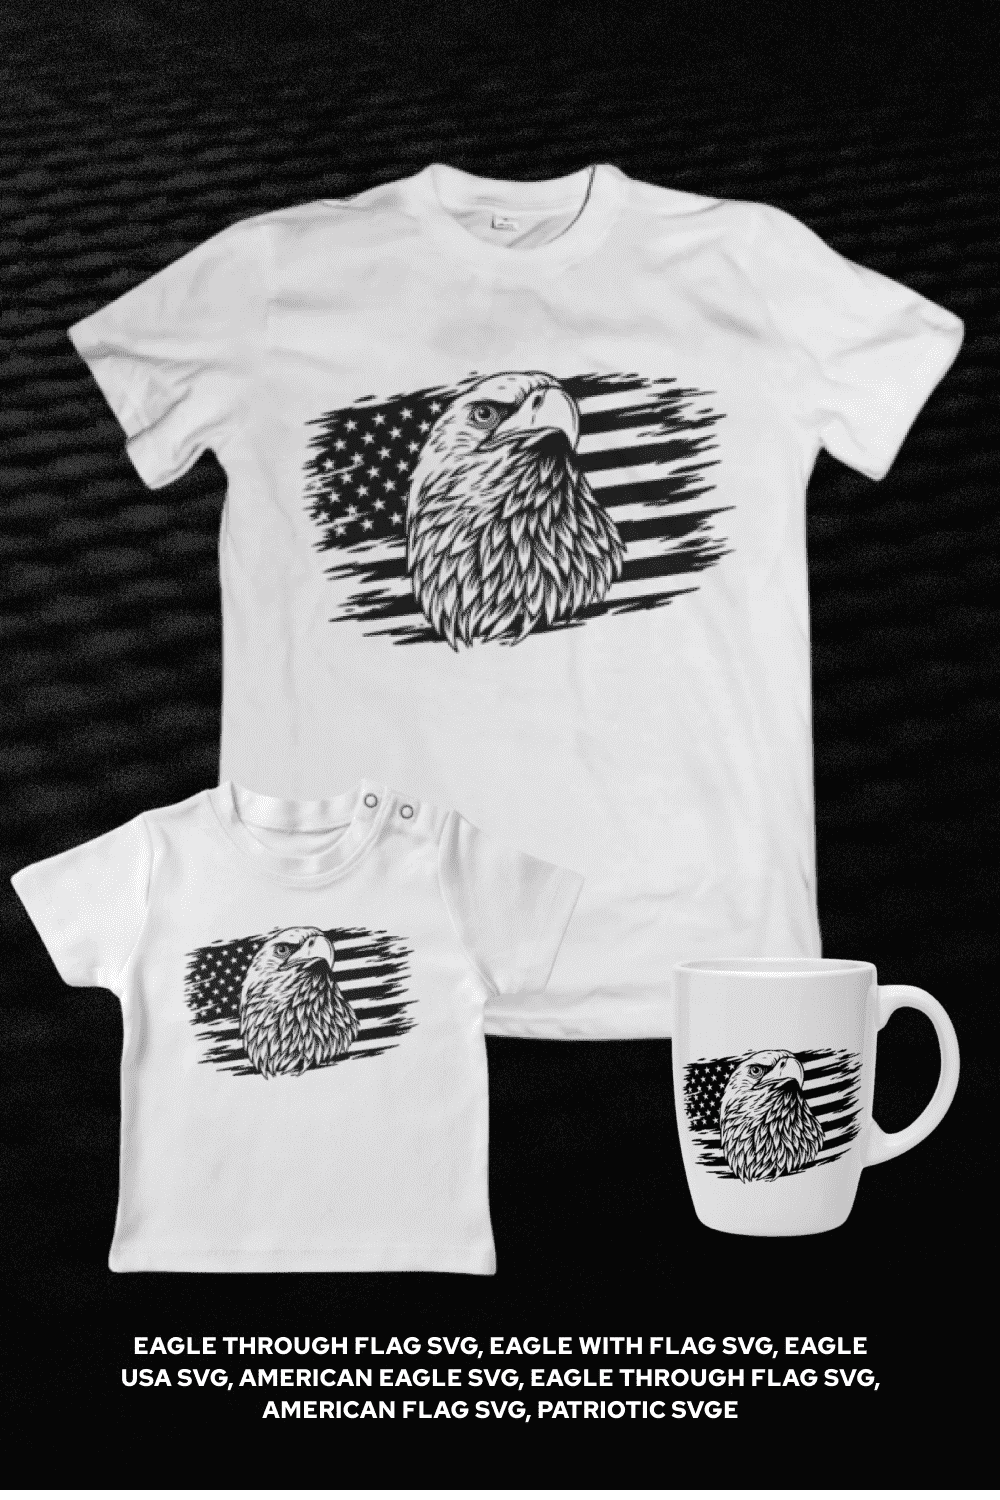 Eagle Through Flag - SVG Bundle - Print On The T-Shirts And Cup.